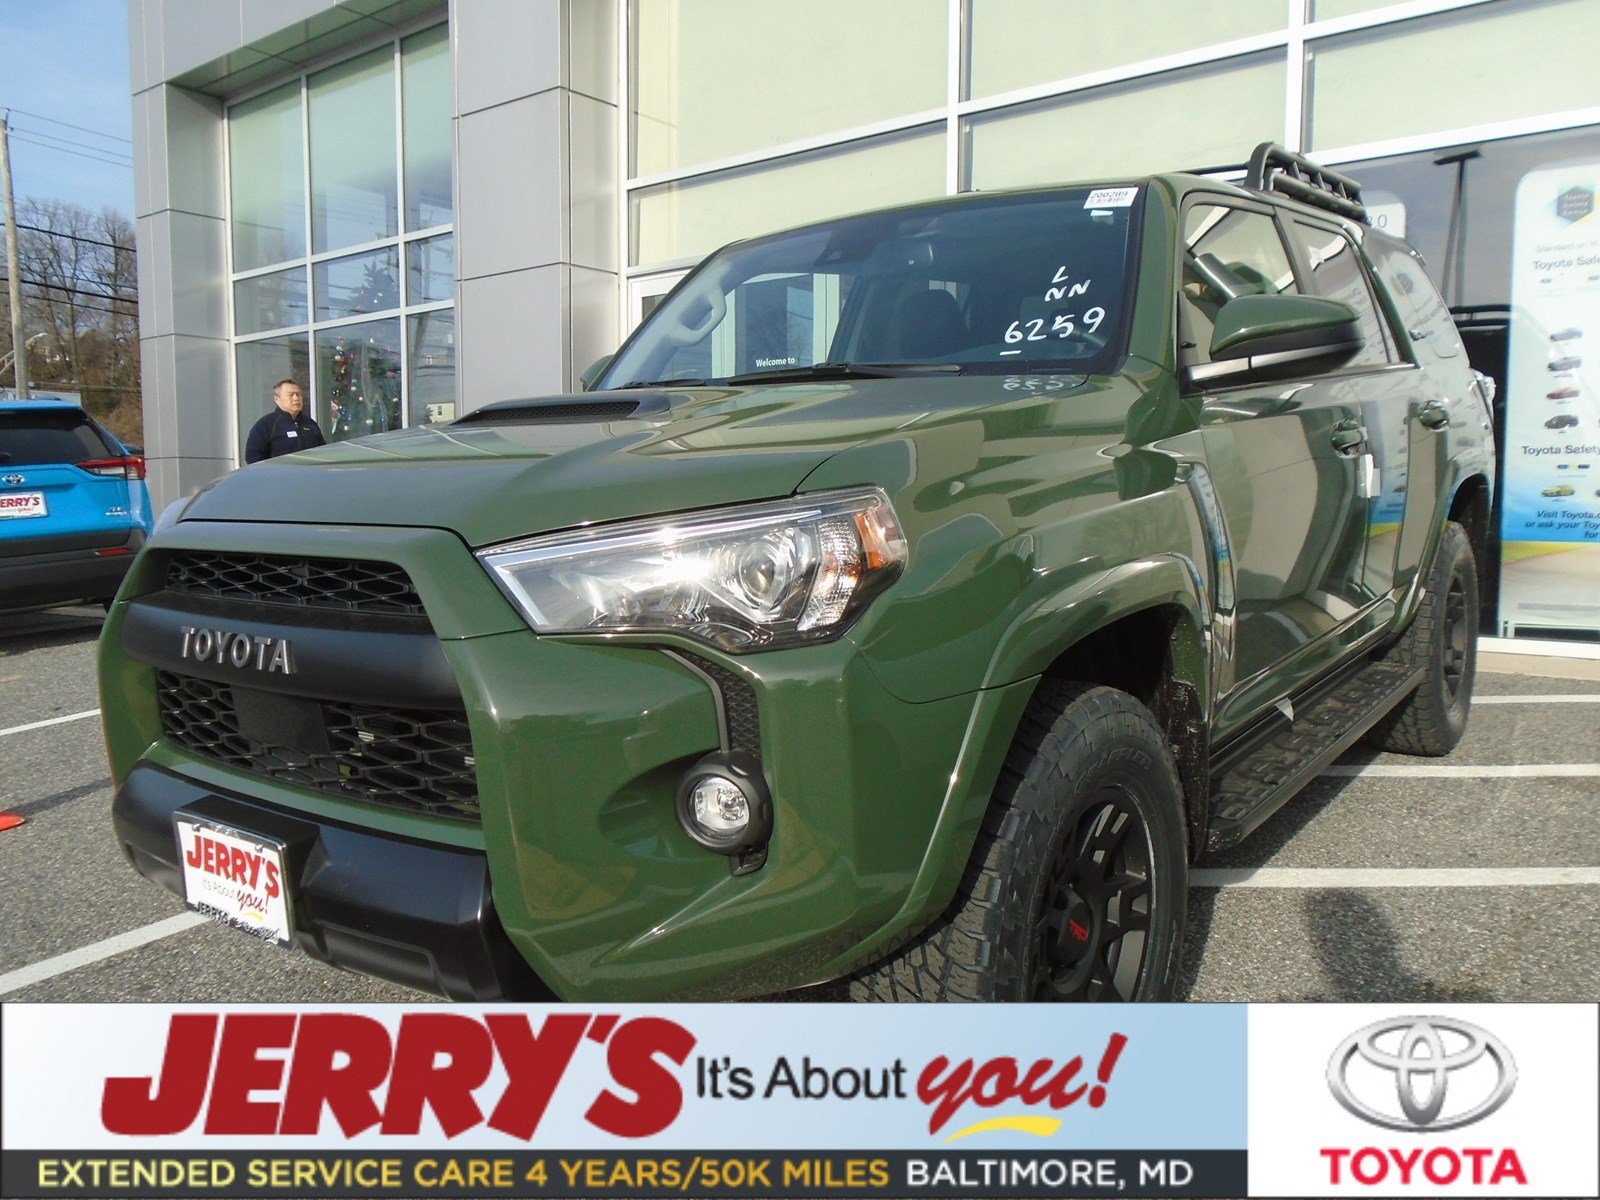 New 2020 Toyota 4runner 4wd Trd Pro With Navigation 4wd